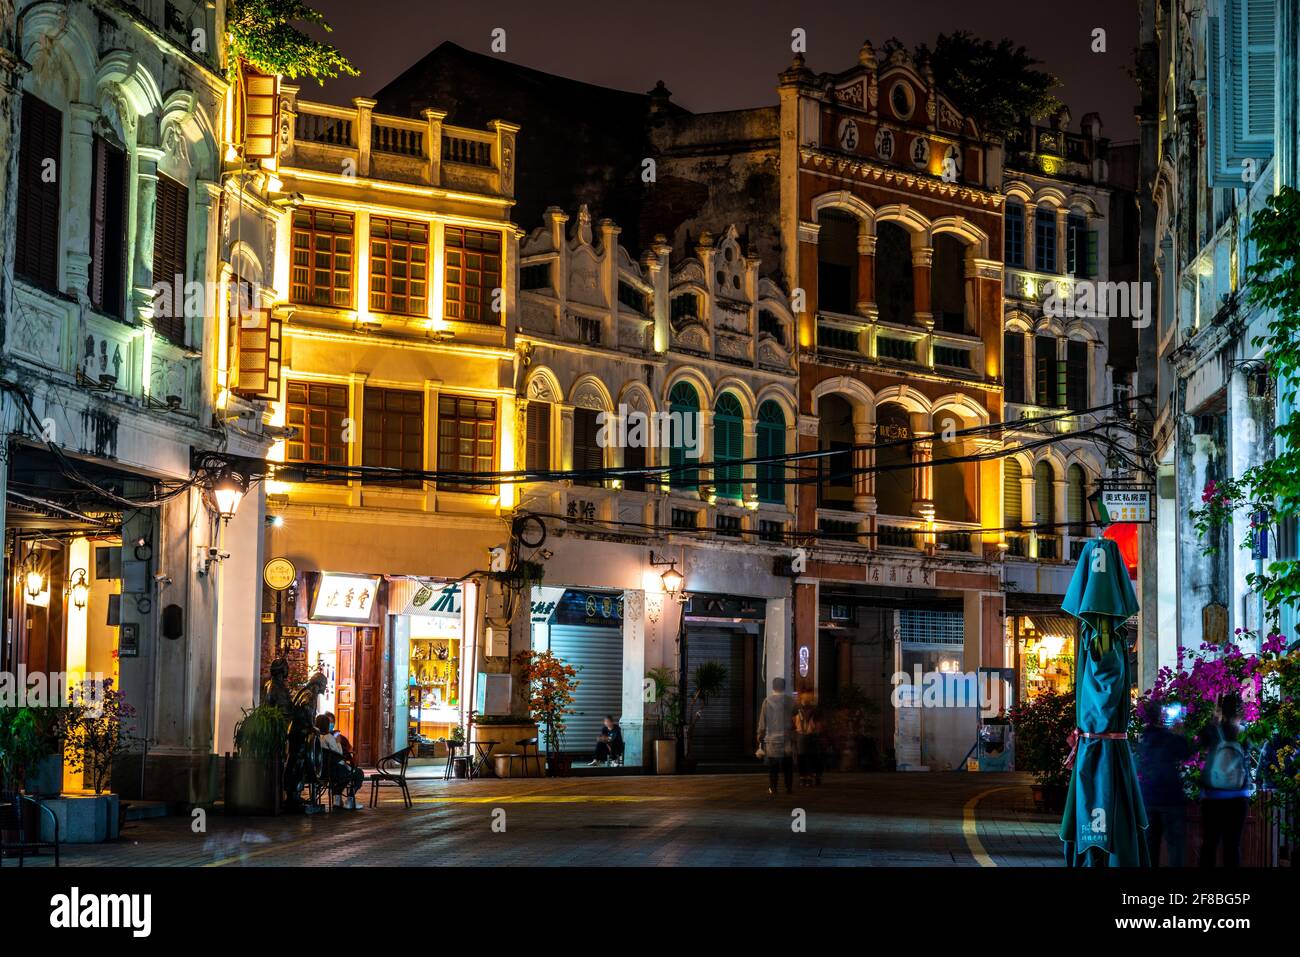 Haikou China , 23 March 2021 : Qilou or Zhongshan old landmark street beautiful scenic view illuminated at night with colonial buildings in Haikou old Stock Photo